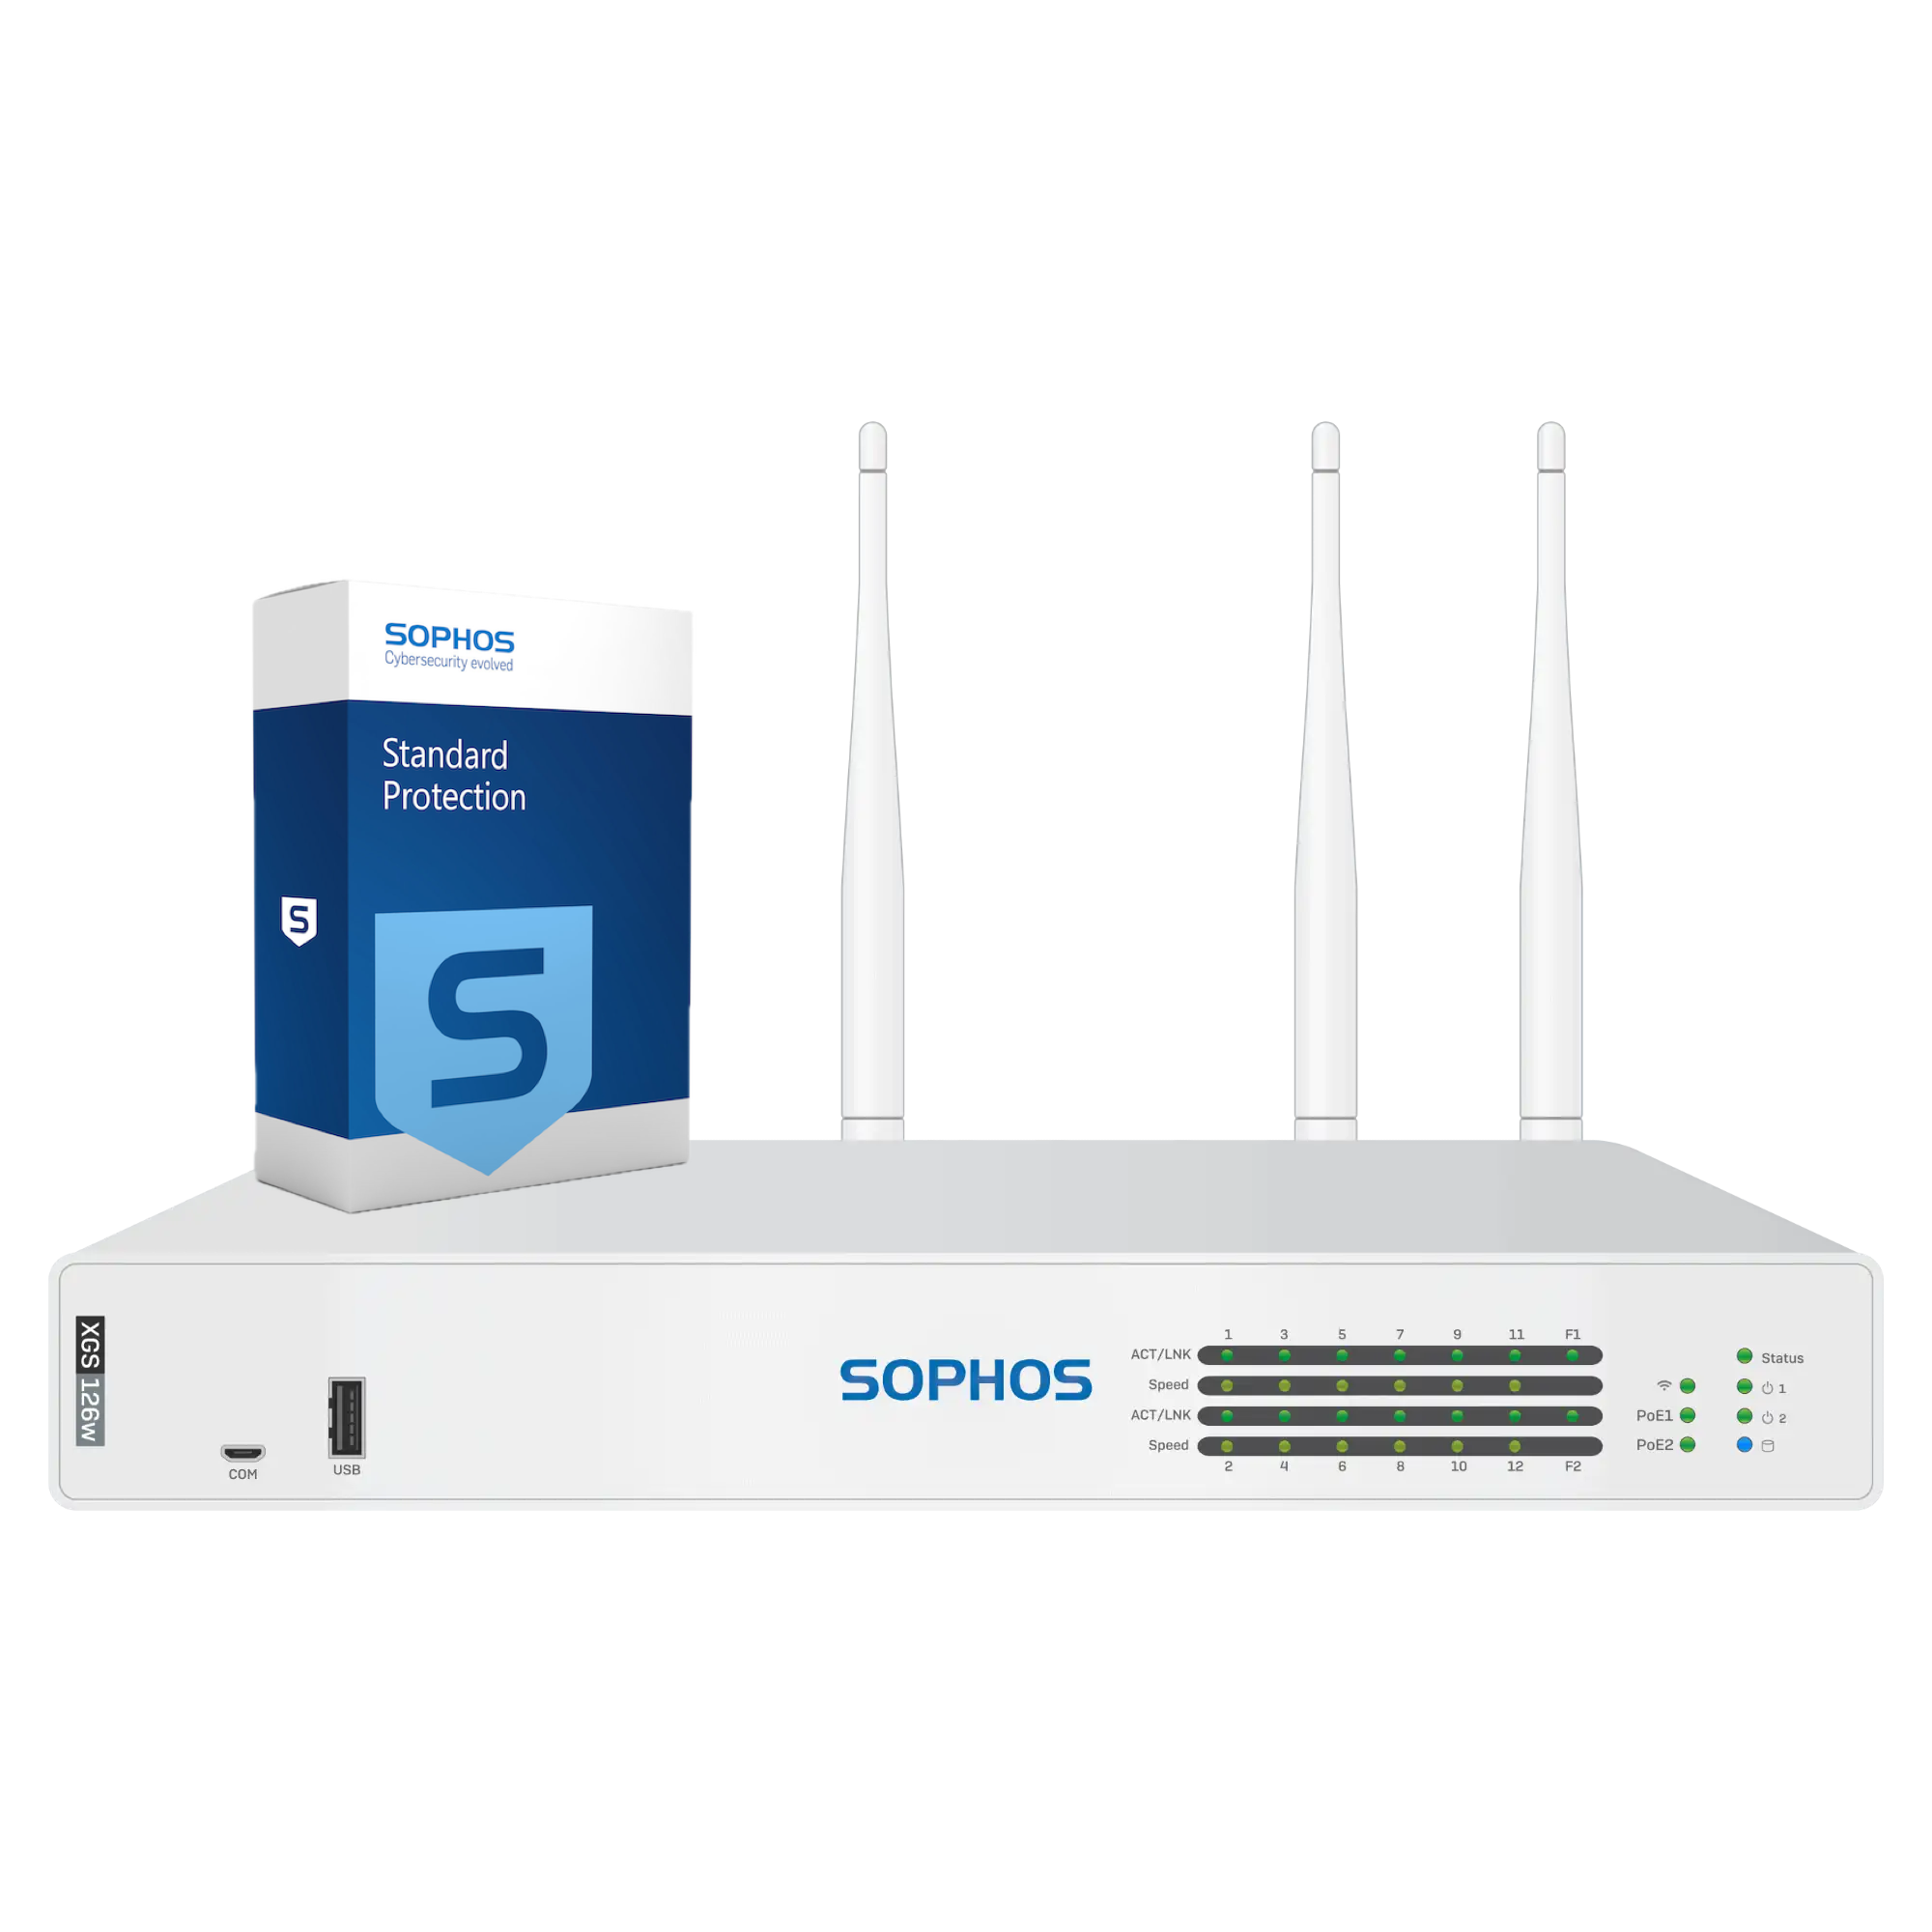 Sophos XGS 126w Firewall with Standard Protection, 1-year - EU power cord